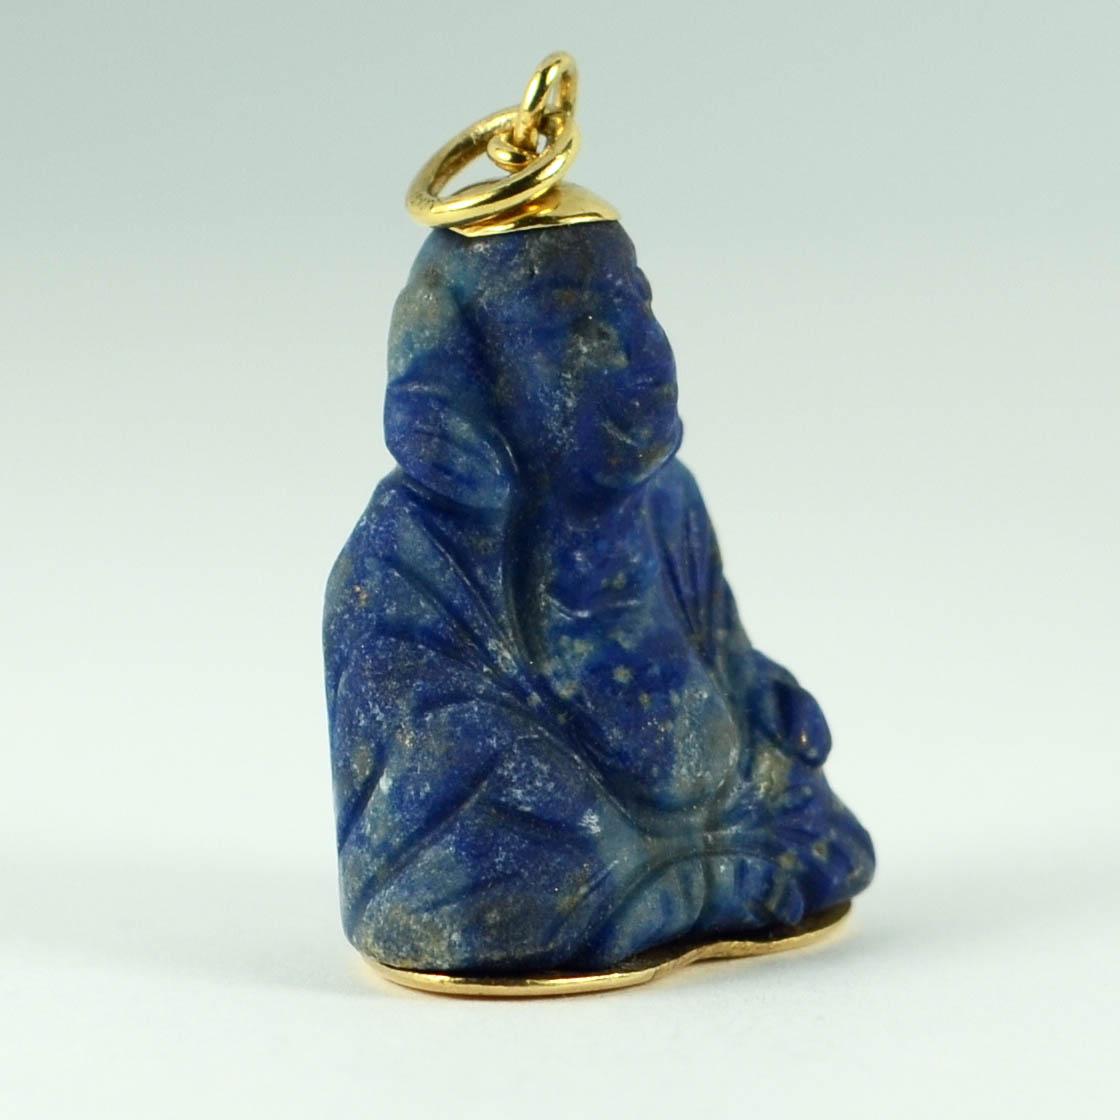 A charm pendant designed as a large carved Buddha sculpture in blue lapis lazuli with 18 karat (18K) yellow gold terminals. Marked 750 to the jump ring for 18 karat gold.

Measurements: 3.1 x 2.2 x 1.5 cm (not including jump ring)
Weight: 10.82 grams